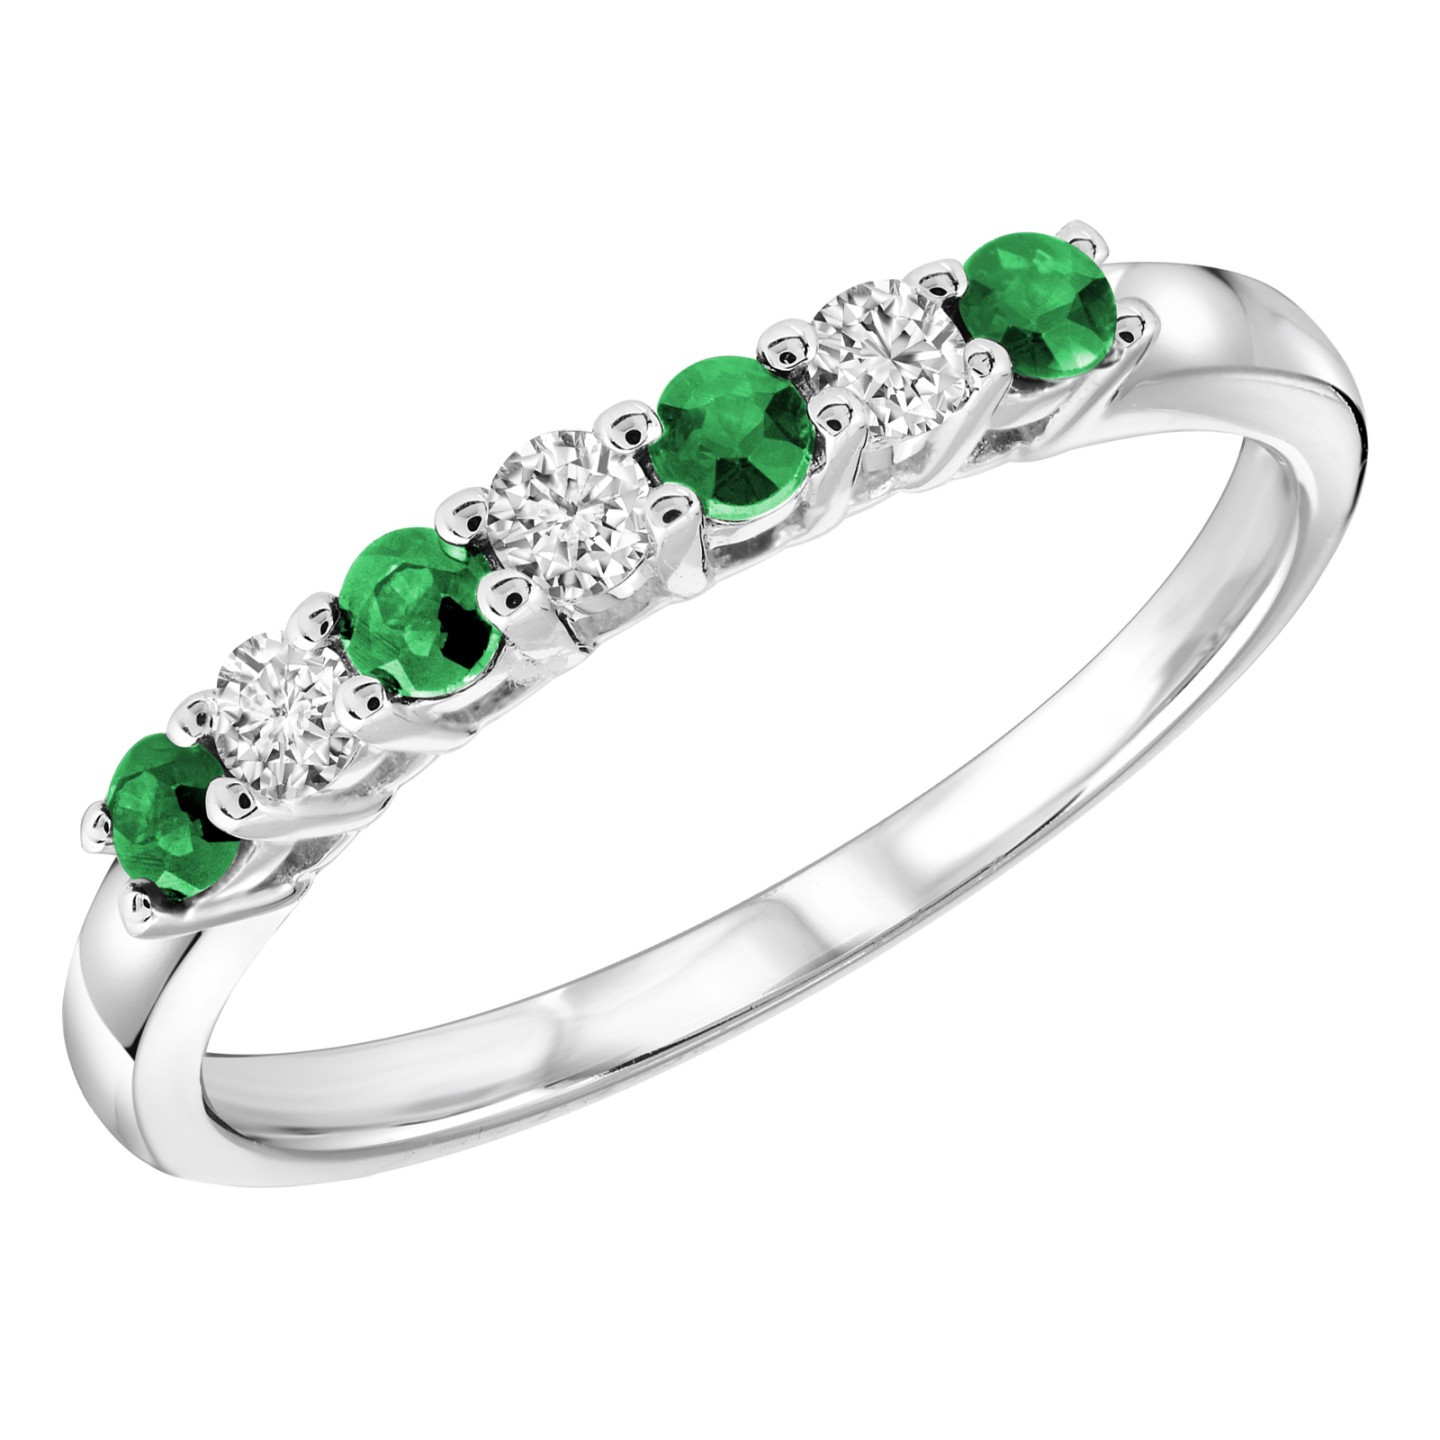 1/3 CTW Round Green Emerald Cocktail Ring in 14K White Gold (MV3021)